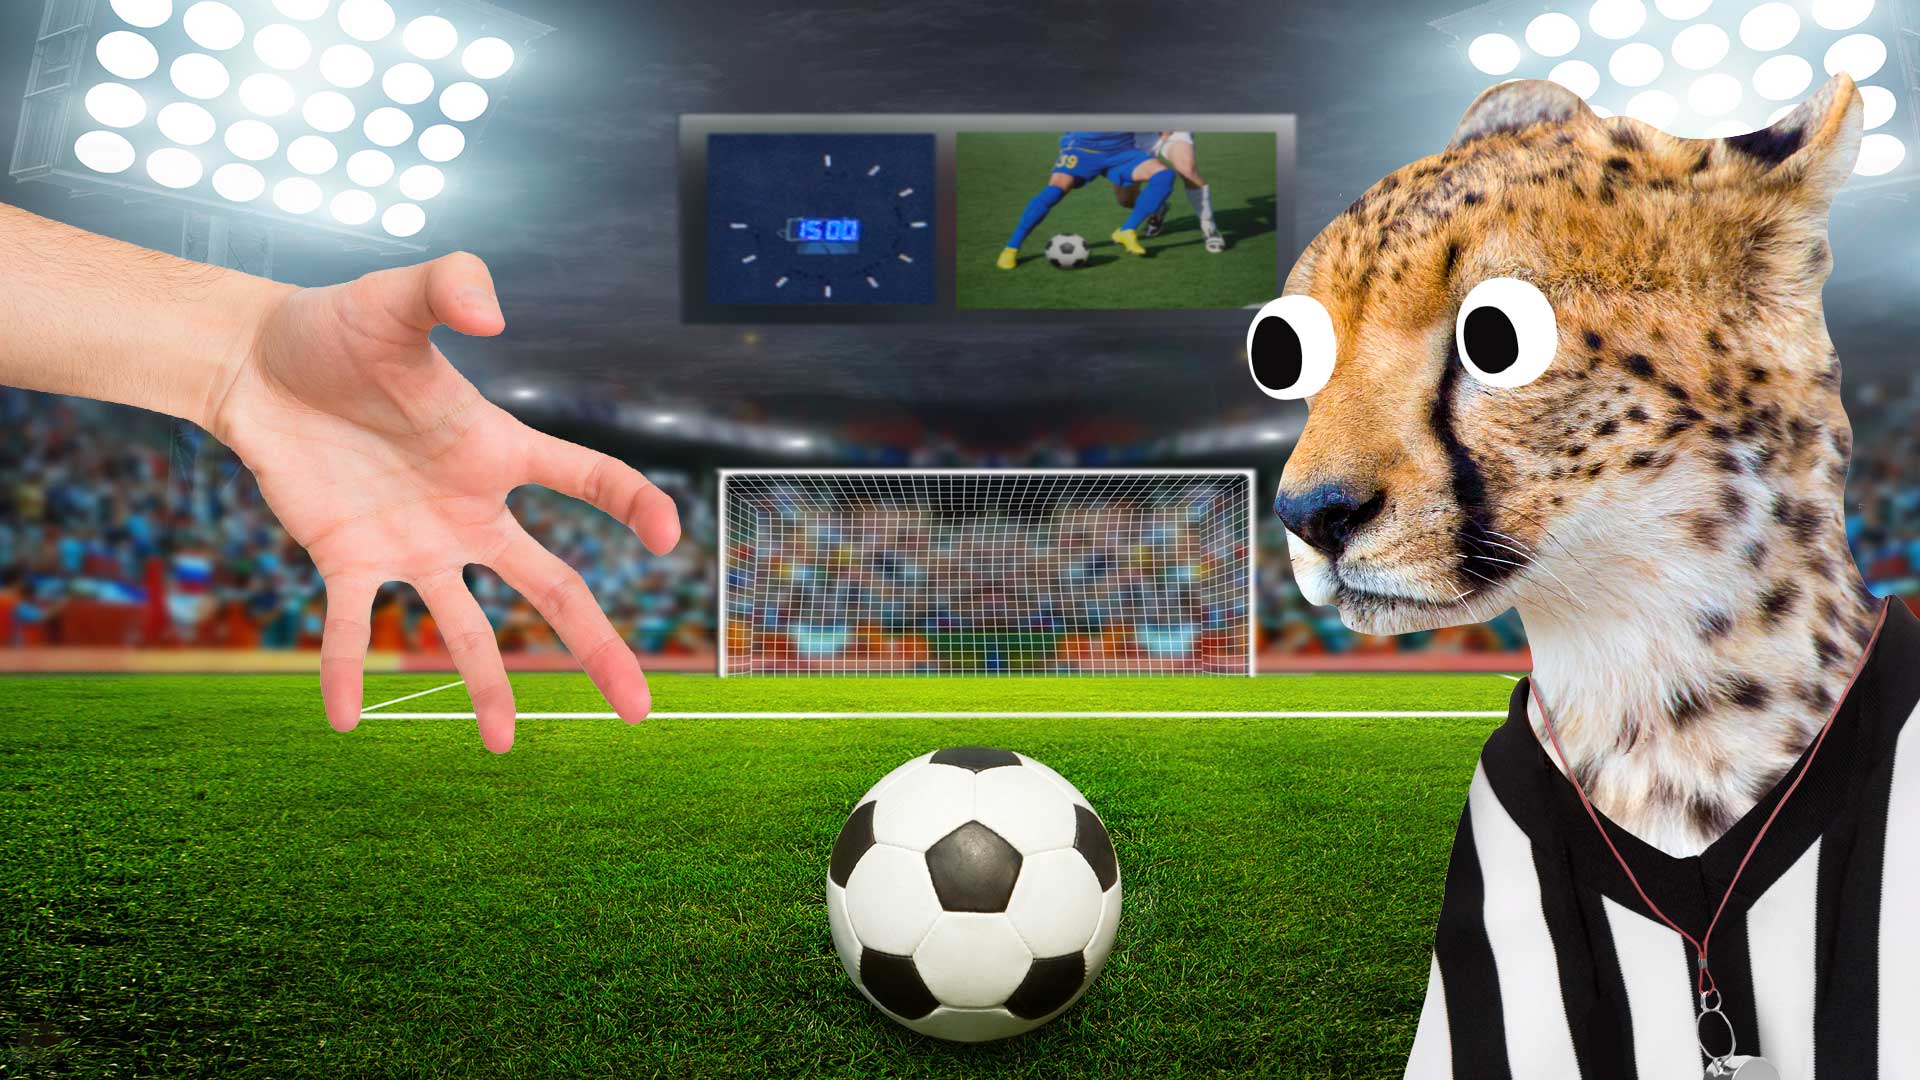 A football placed on the penalty spot while a cheetah dressed as a referee looks at an outstretched hand